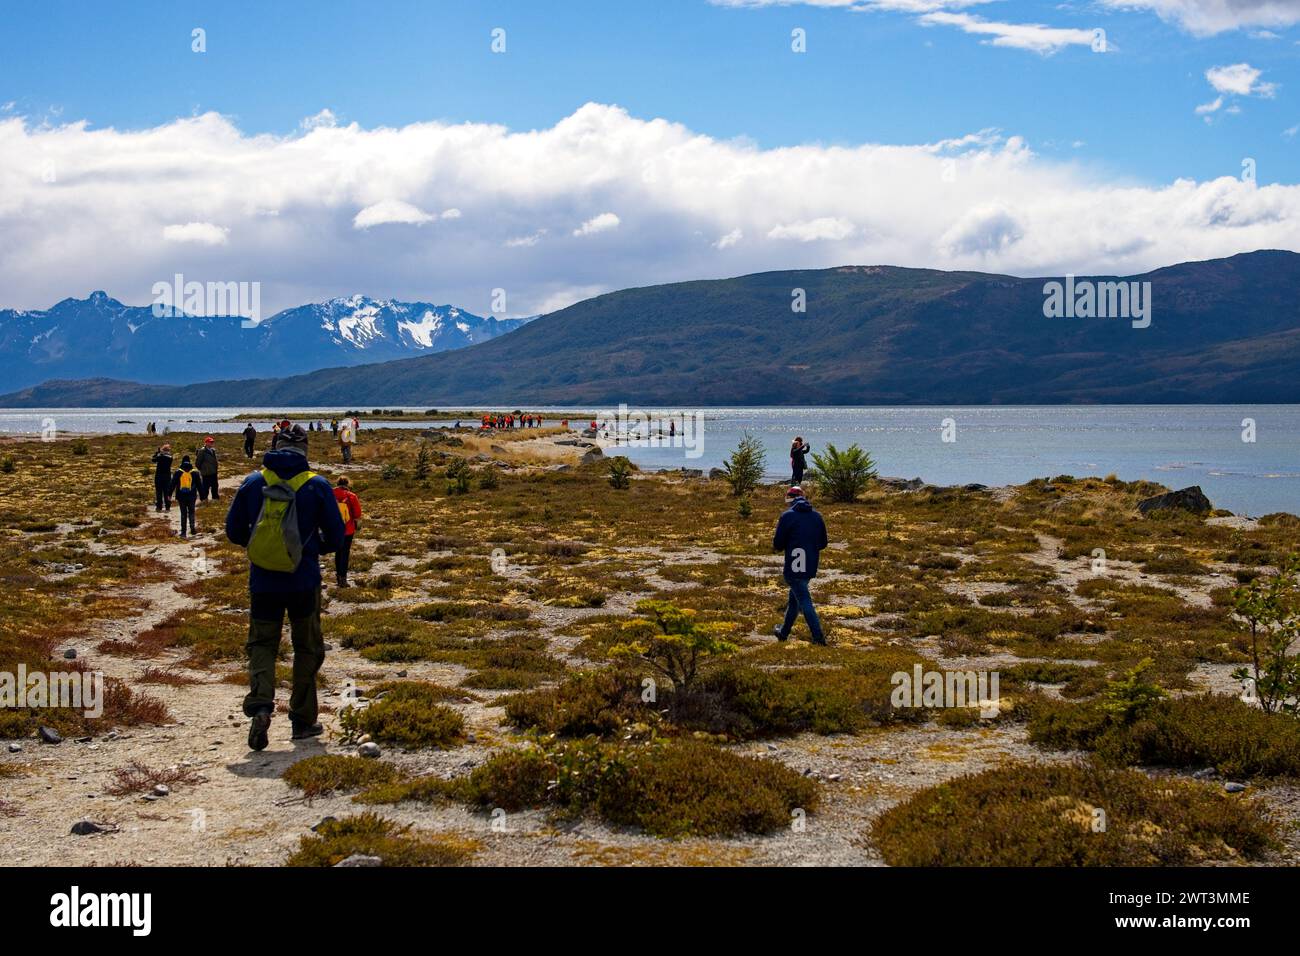 Australis cruise ship expedition landing at Ainsworth Bay, in the Tierra del Fuego region of Chile. Stock Photo